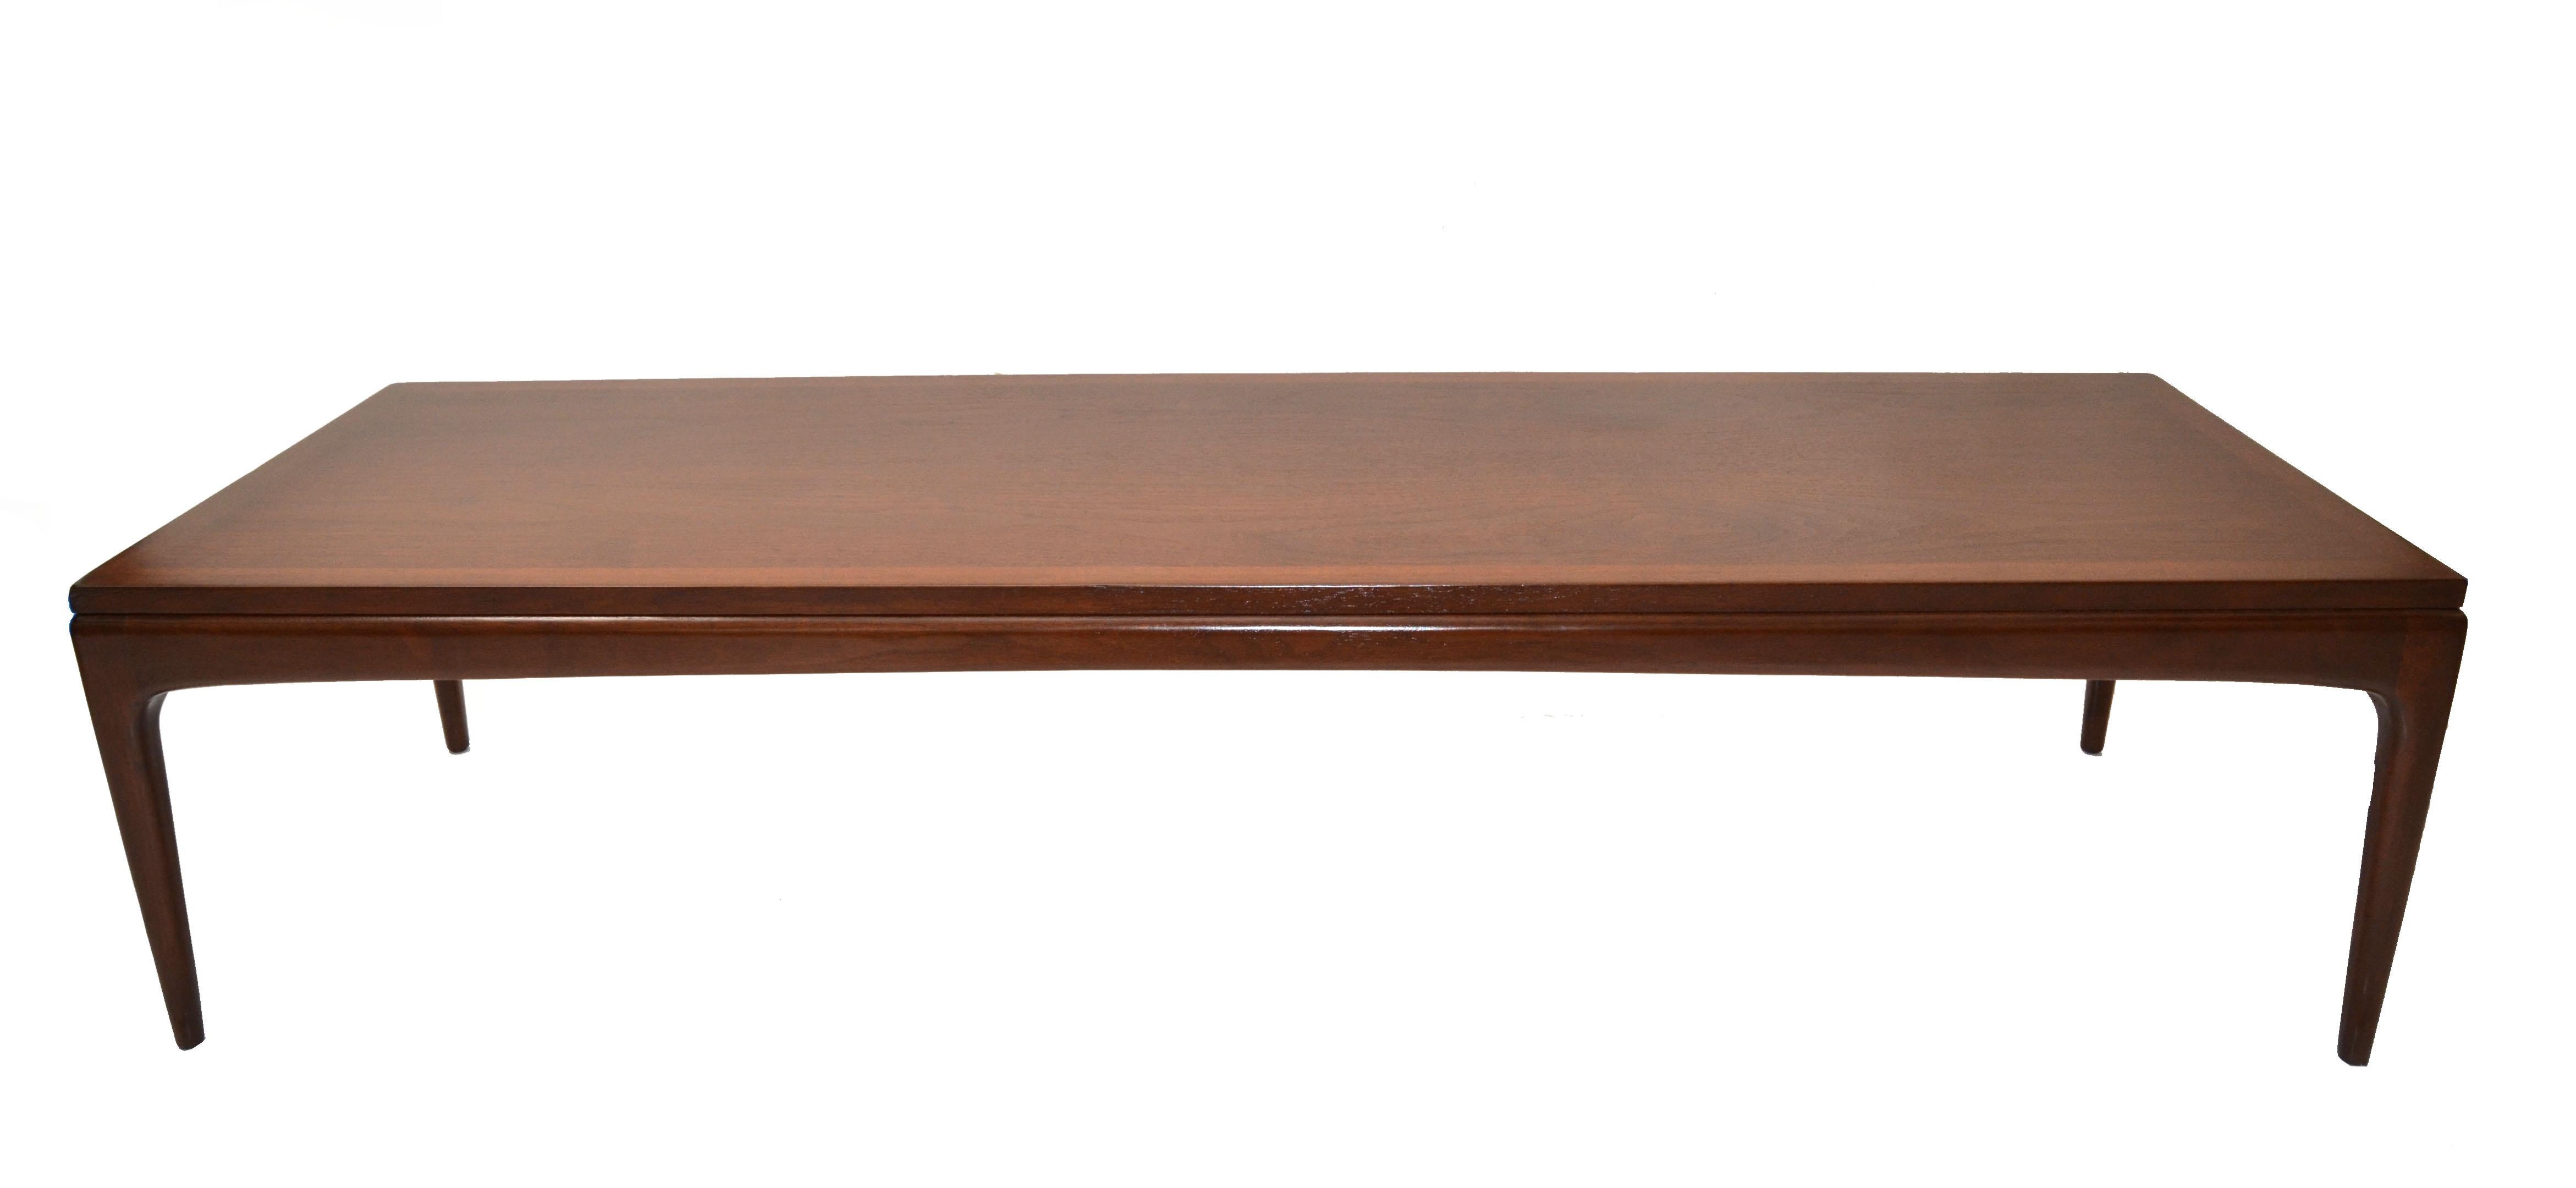 Italian long rectangle low Coffee Table in Walnut Wood with tapered Legs attributed to Gio Ponti. 
A Classic Sofa Table Mid-Century Modern from Italy.
Restored condition and ready for a new Home.